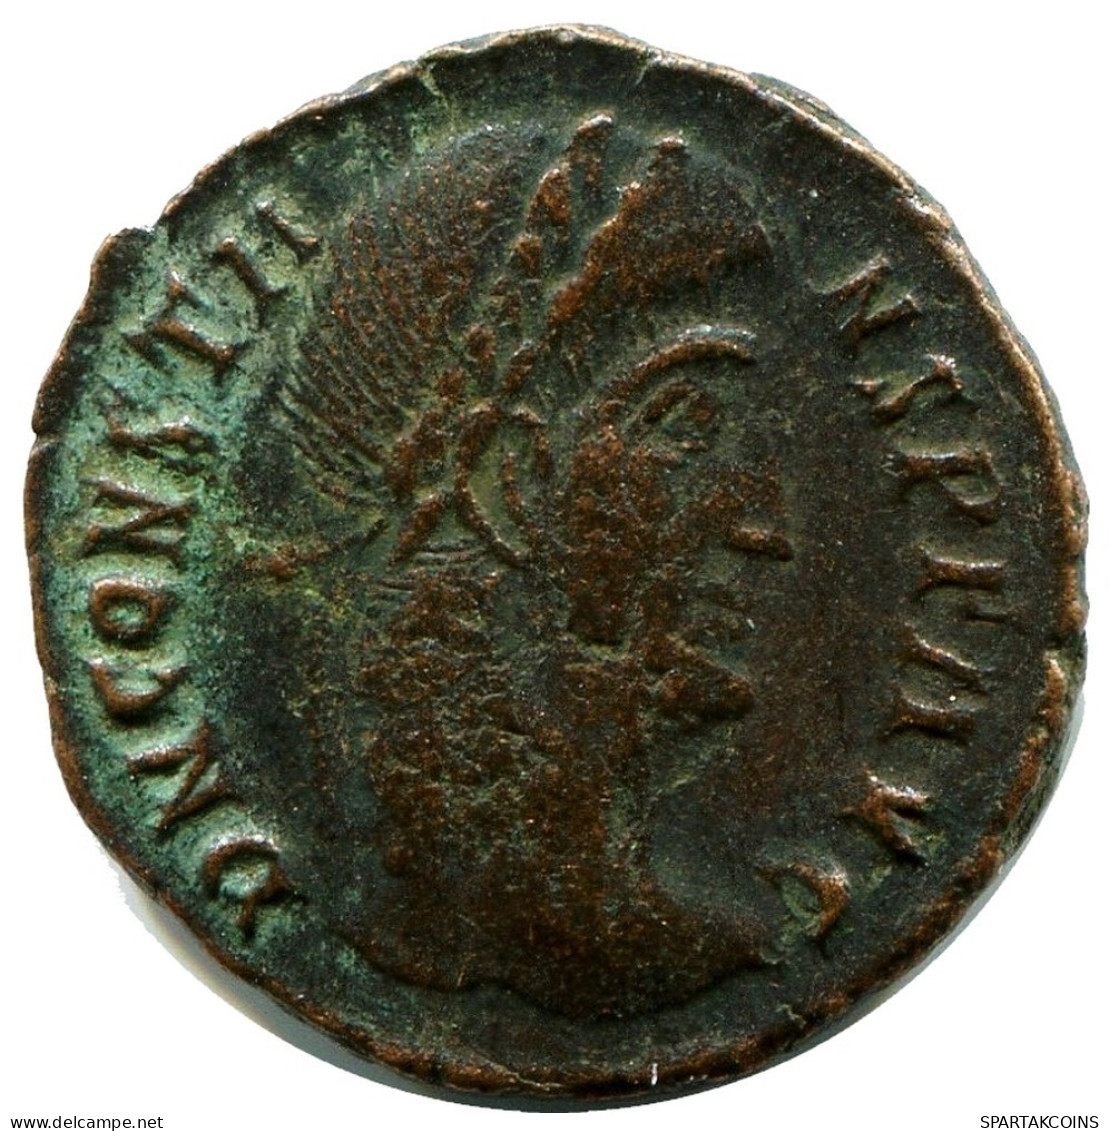 CONSTANS MINTED IN CYZICUS FROM THE ROYAL ONTARIO MUSEUM #ANC11595.14.D.A - The Christian Empire (307 AD To 363 AD)